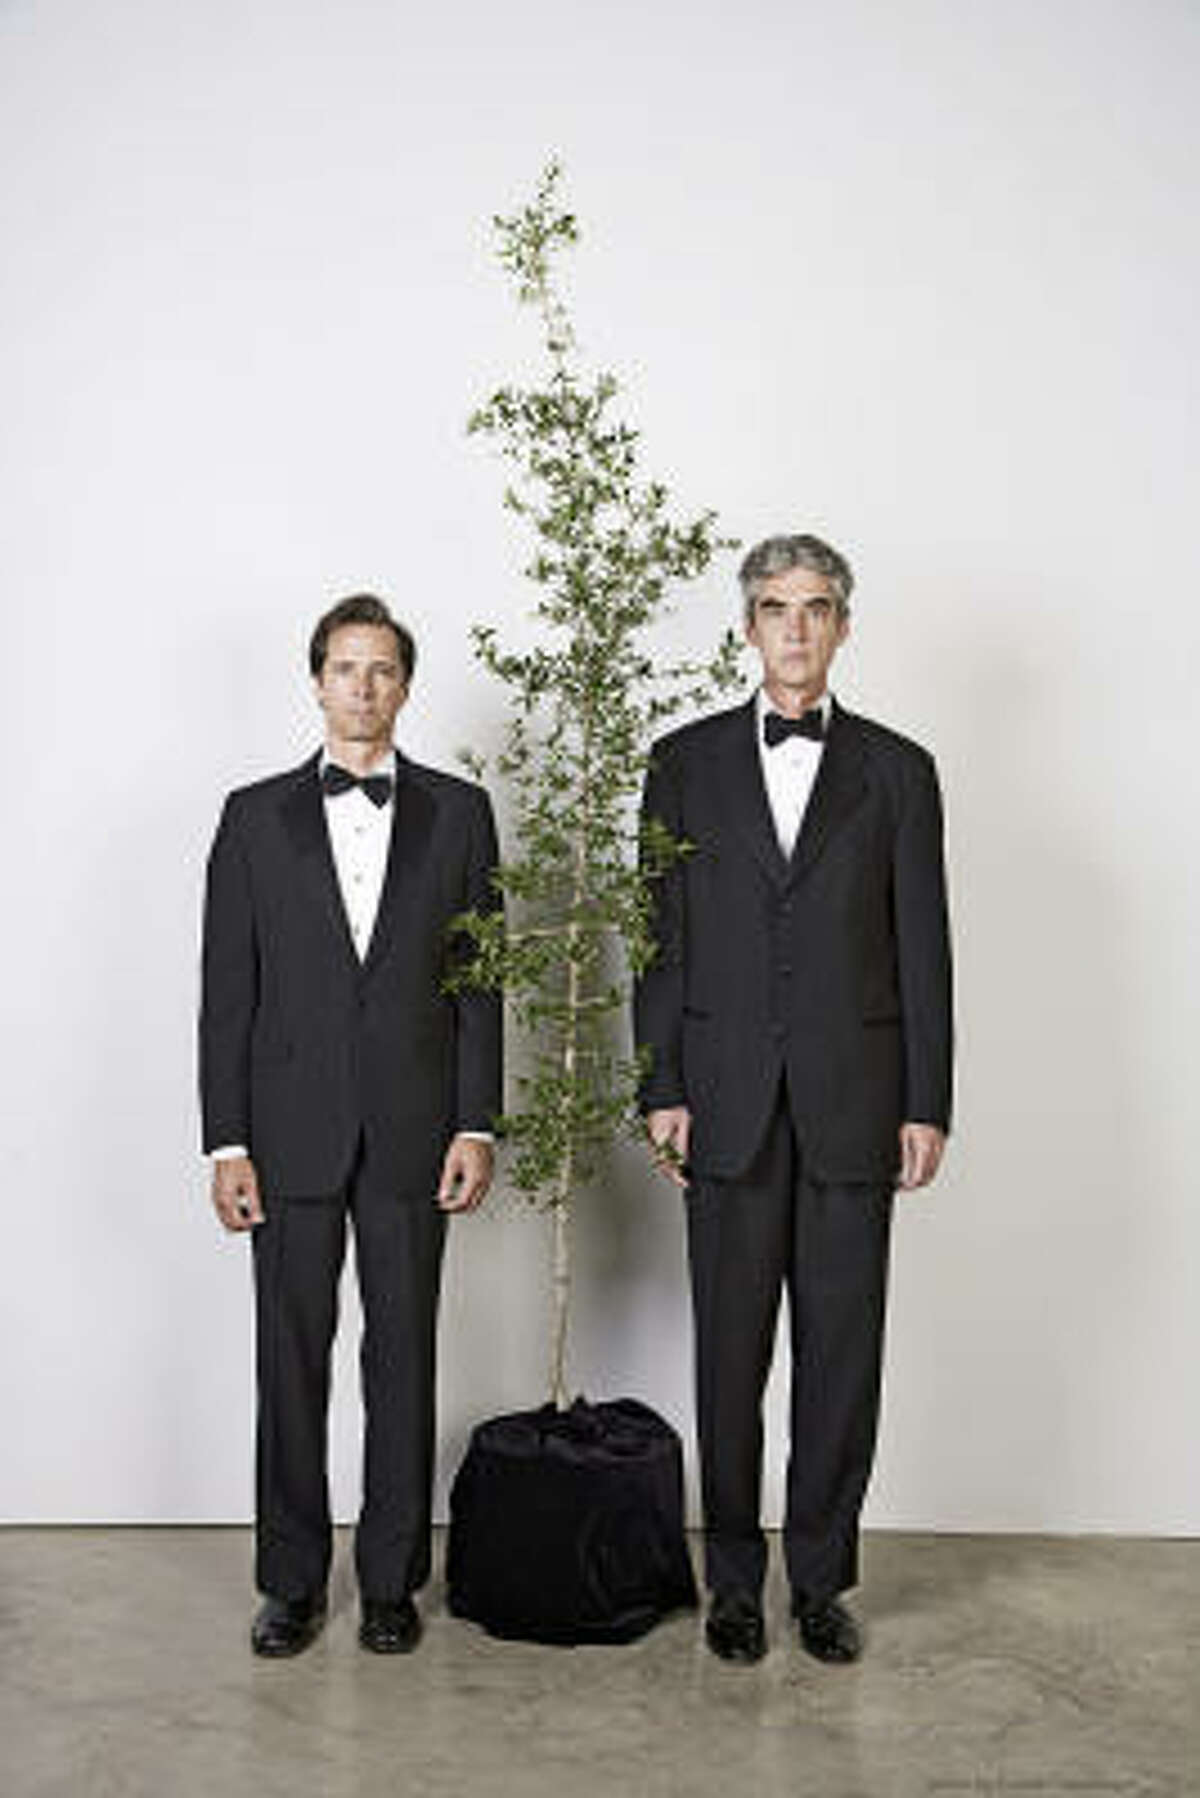 The Art Guys - Jack Massing, left, and Michael Galbreth - are staging a performance in which they marry a plant.